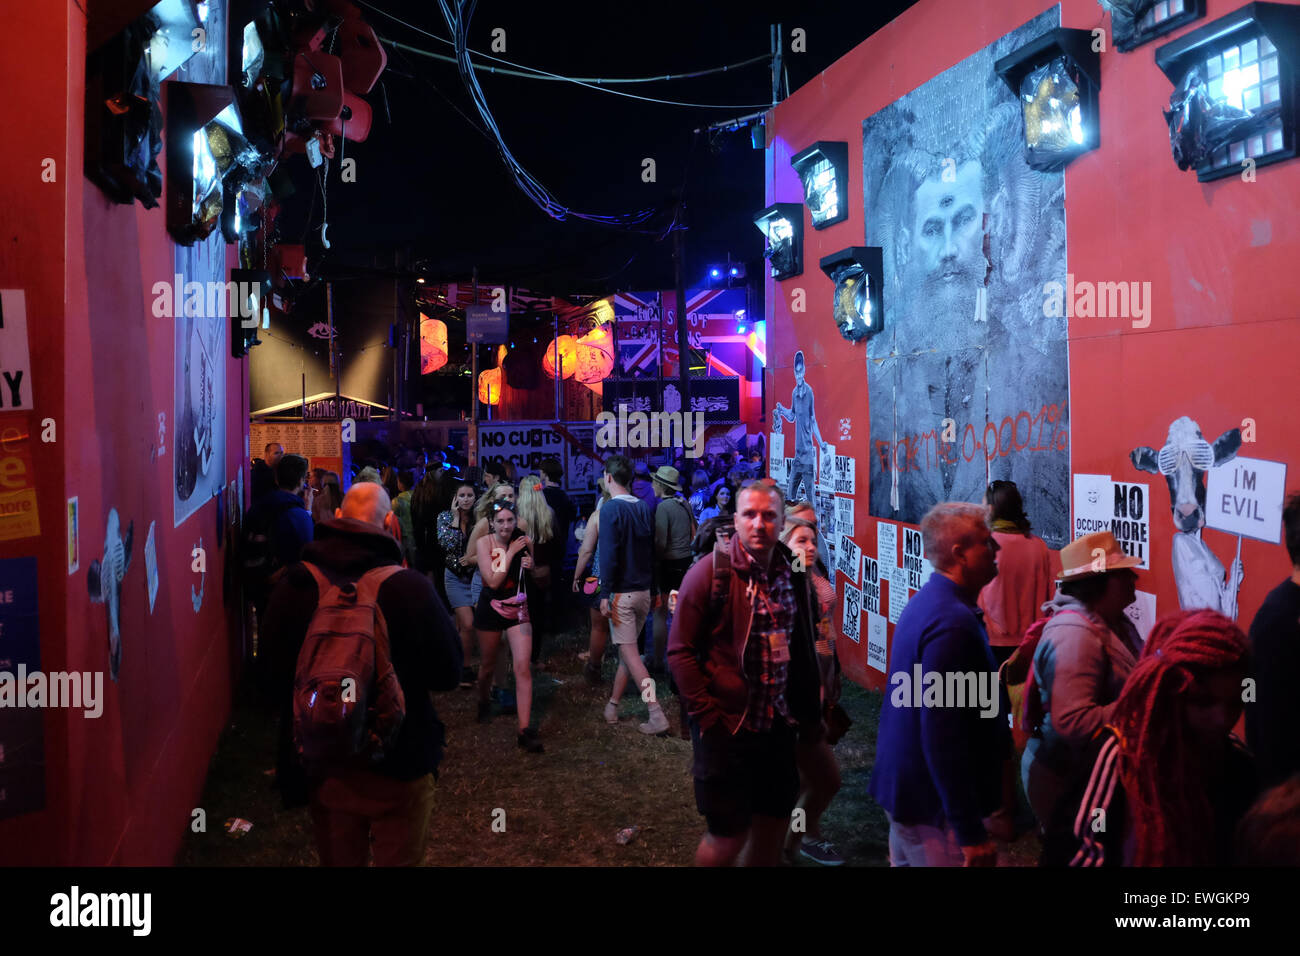 Glastonbury Festival, Somerset, UK. 25 June 2015. As night falls revellers make their way to the south west corner of the Festival site where they find Shangri-La. Shangri-La, described as a shimmering ephemeral city that appears magically once a year, is based on a dystopian pleasure city that was destroyed. It is Hell, Purgatory and Heaven all rolled into one. Credit:  Tom Corban/Alamy Live News Stock Photo